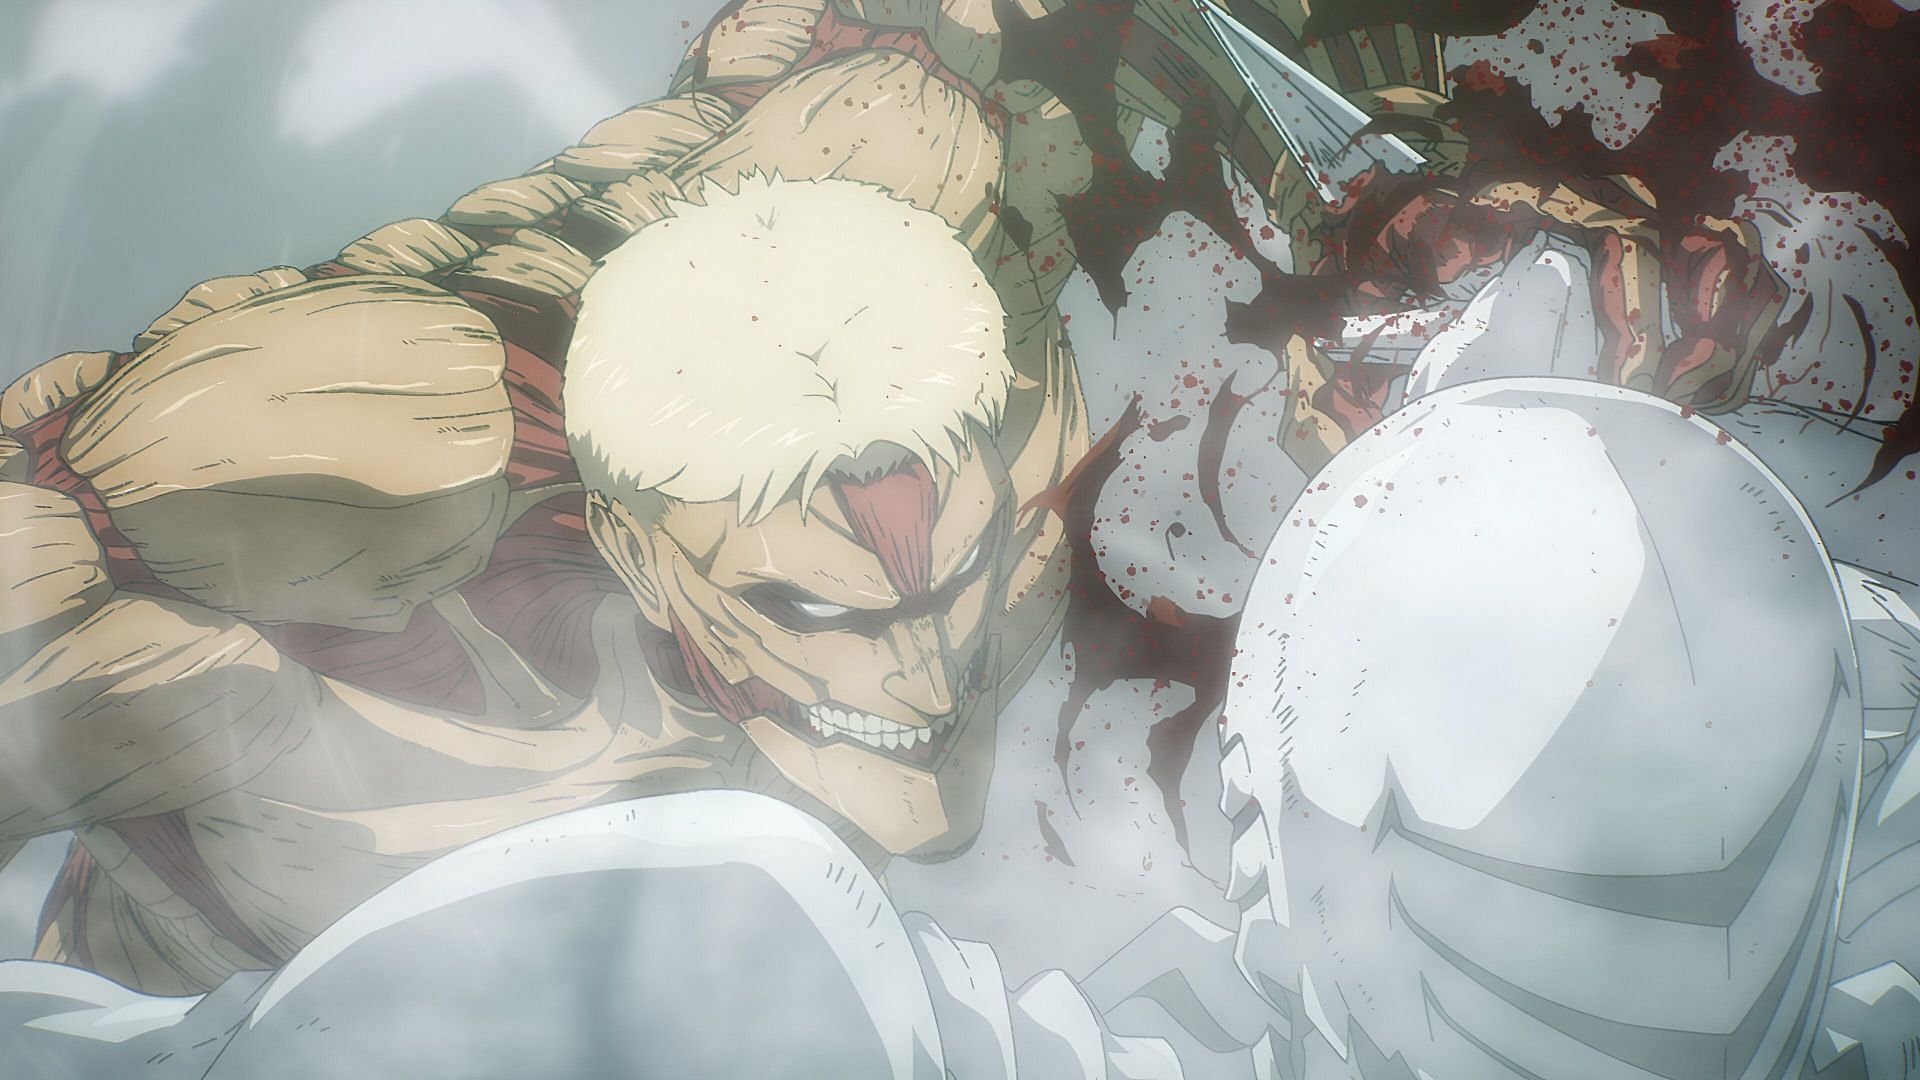 Reiner&#039;s Armor Titan as seen in the anime (Image via MAPPA)